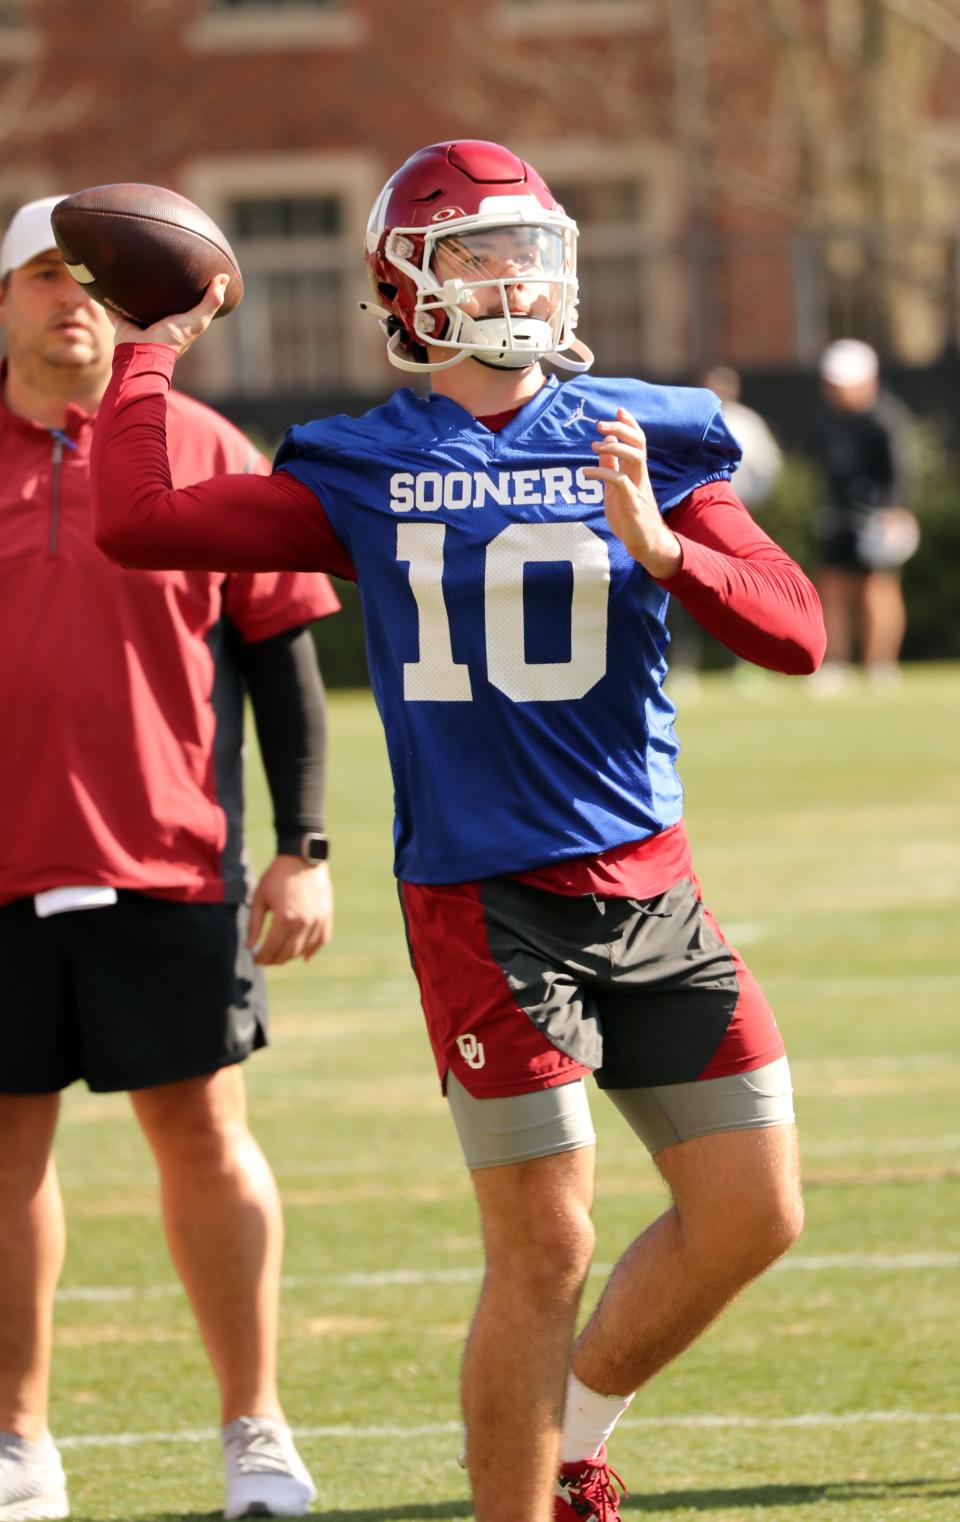 OU freshman quarterback Jackson Arnold (10) throws a pass during practice on March 21 in Norman.